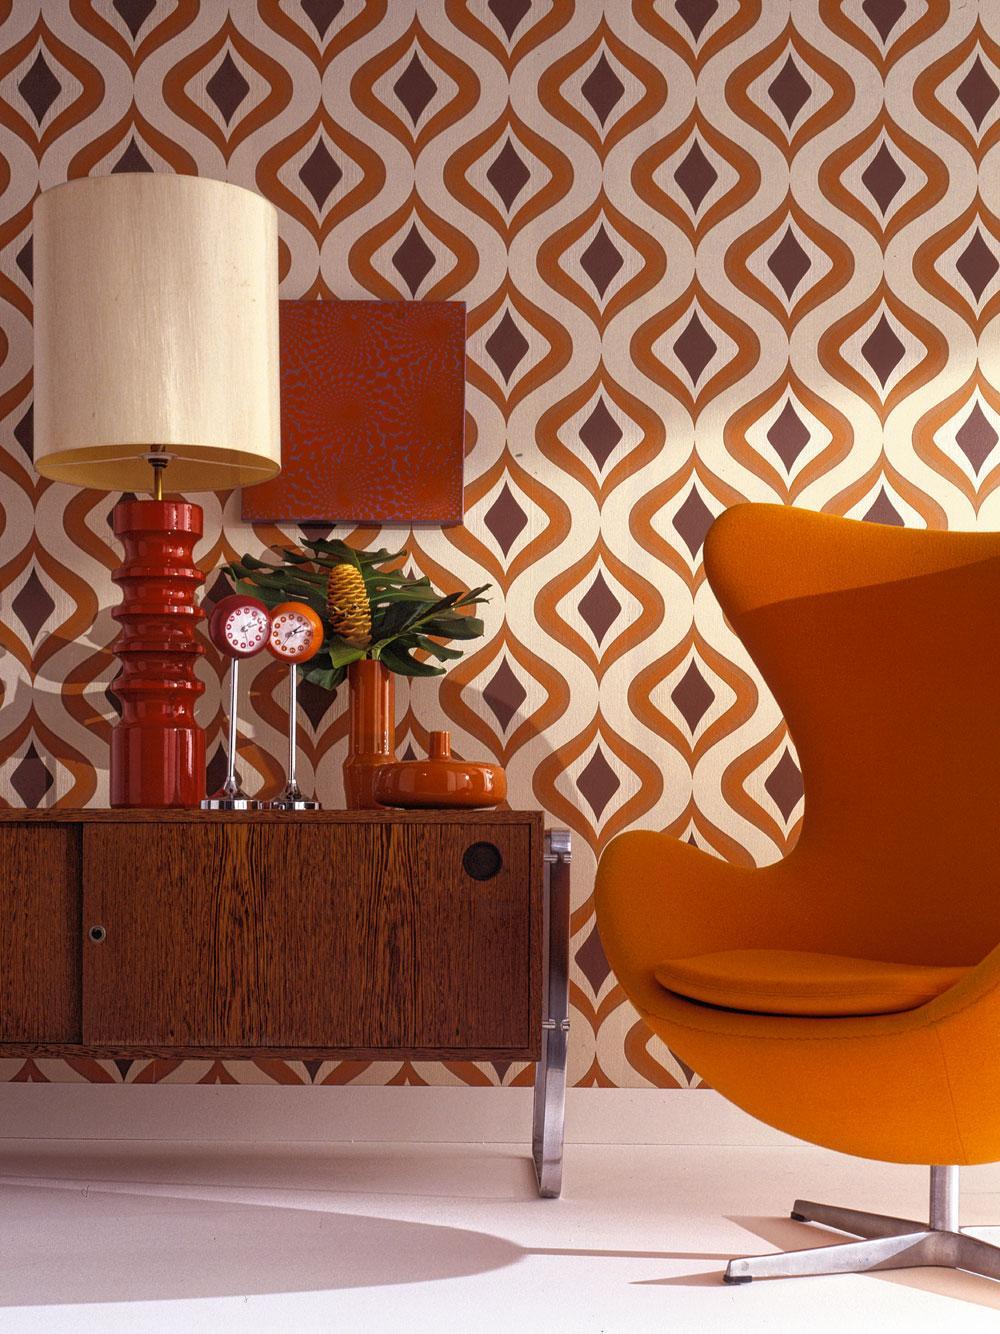 Behang Triton, 39,90 euro per rol Wallpaper from the seventies, www.wallpaperfromthe70s.com